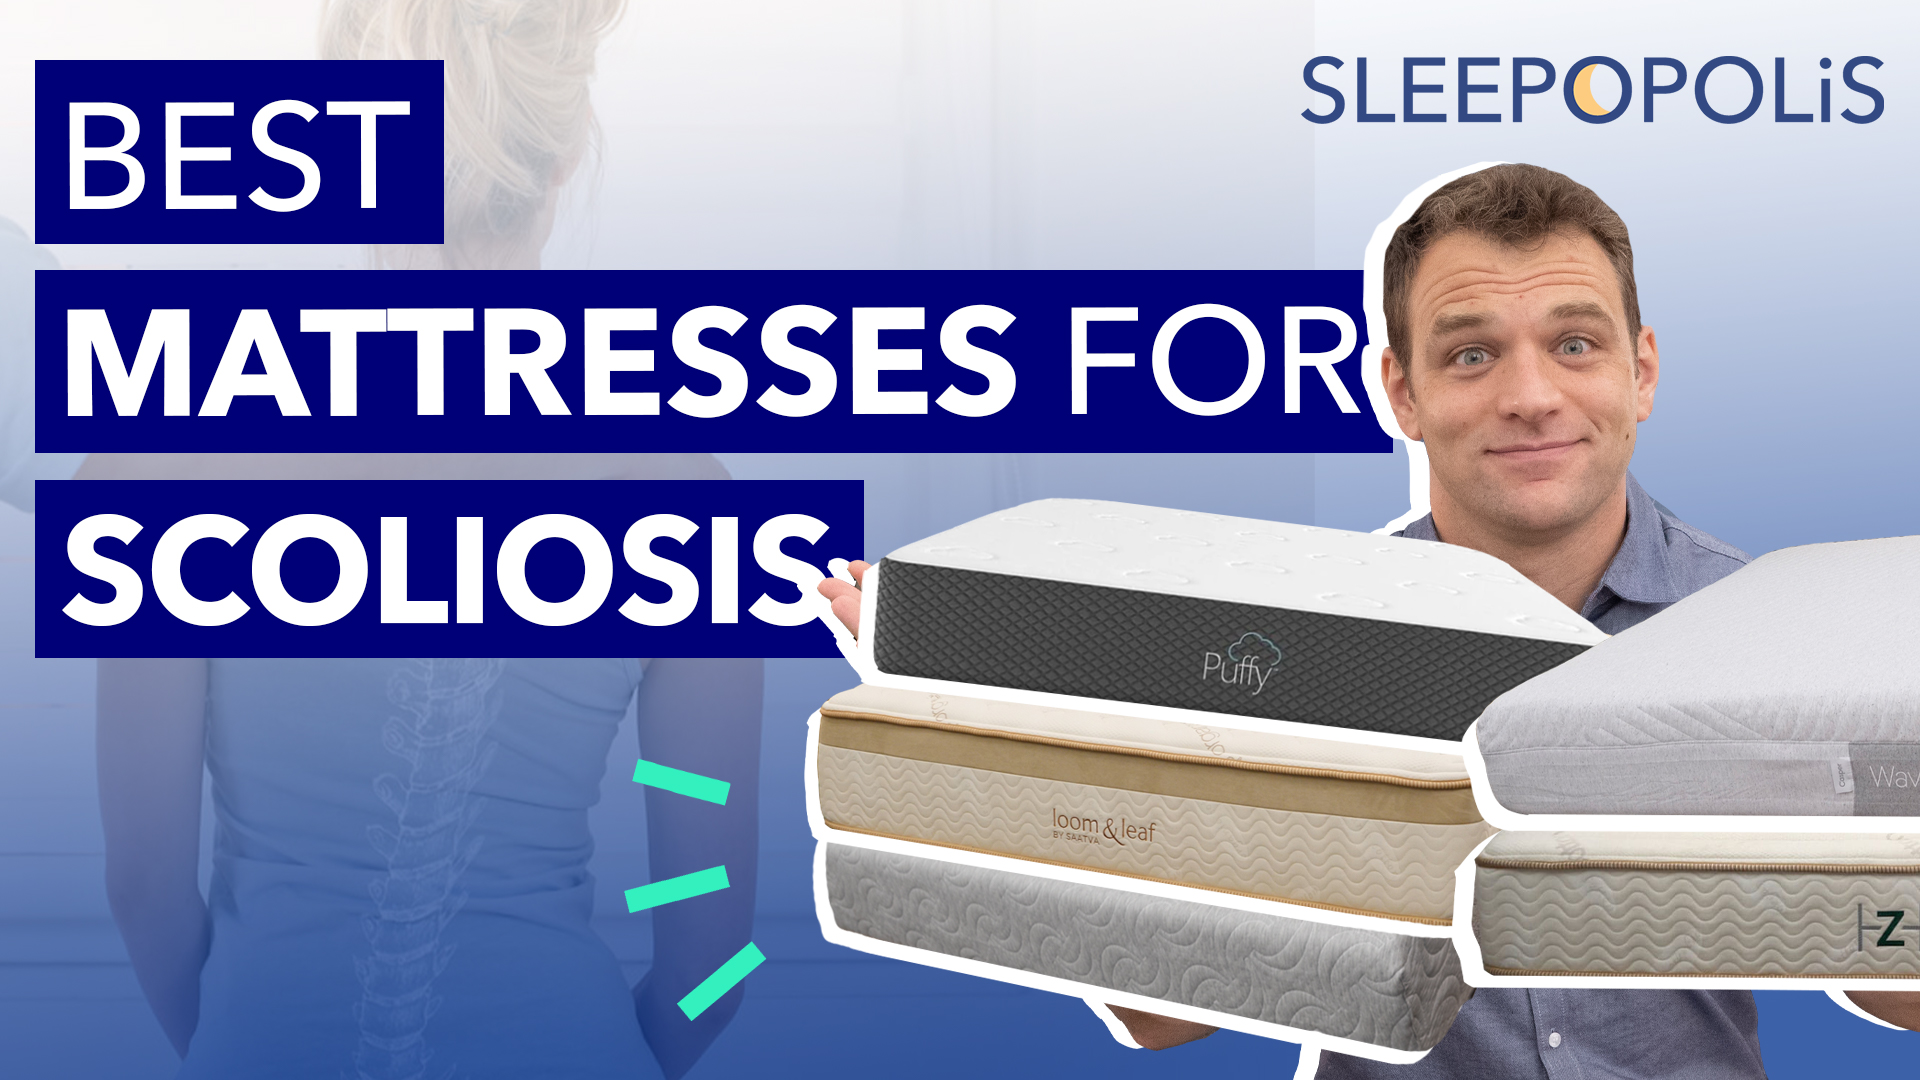 Best Mattresses for Scoliosis According to Our Sleep Experts